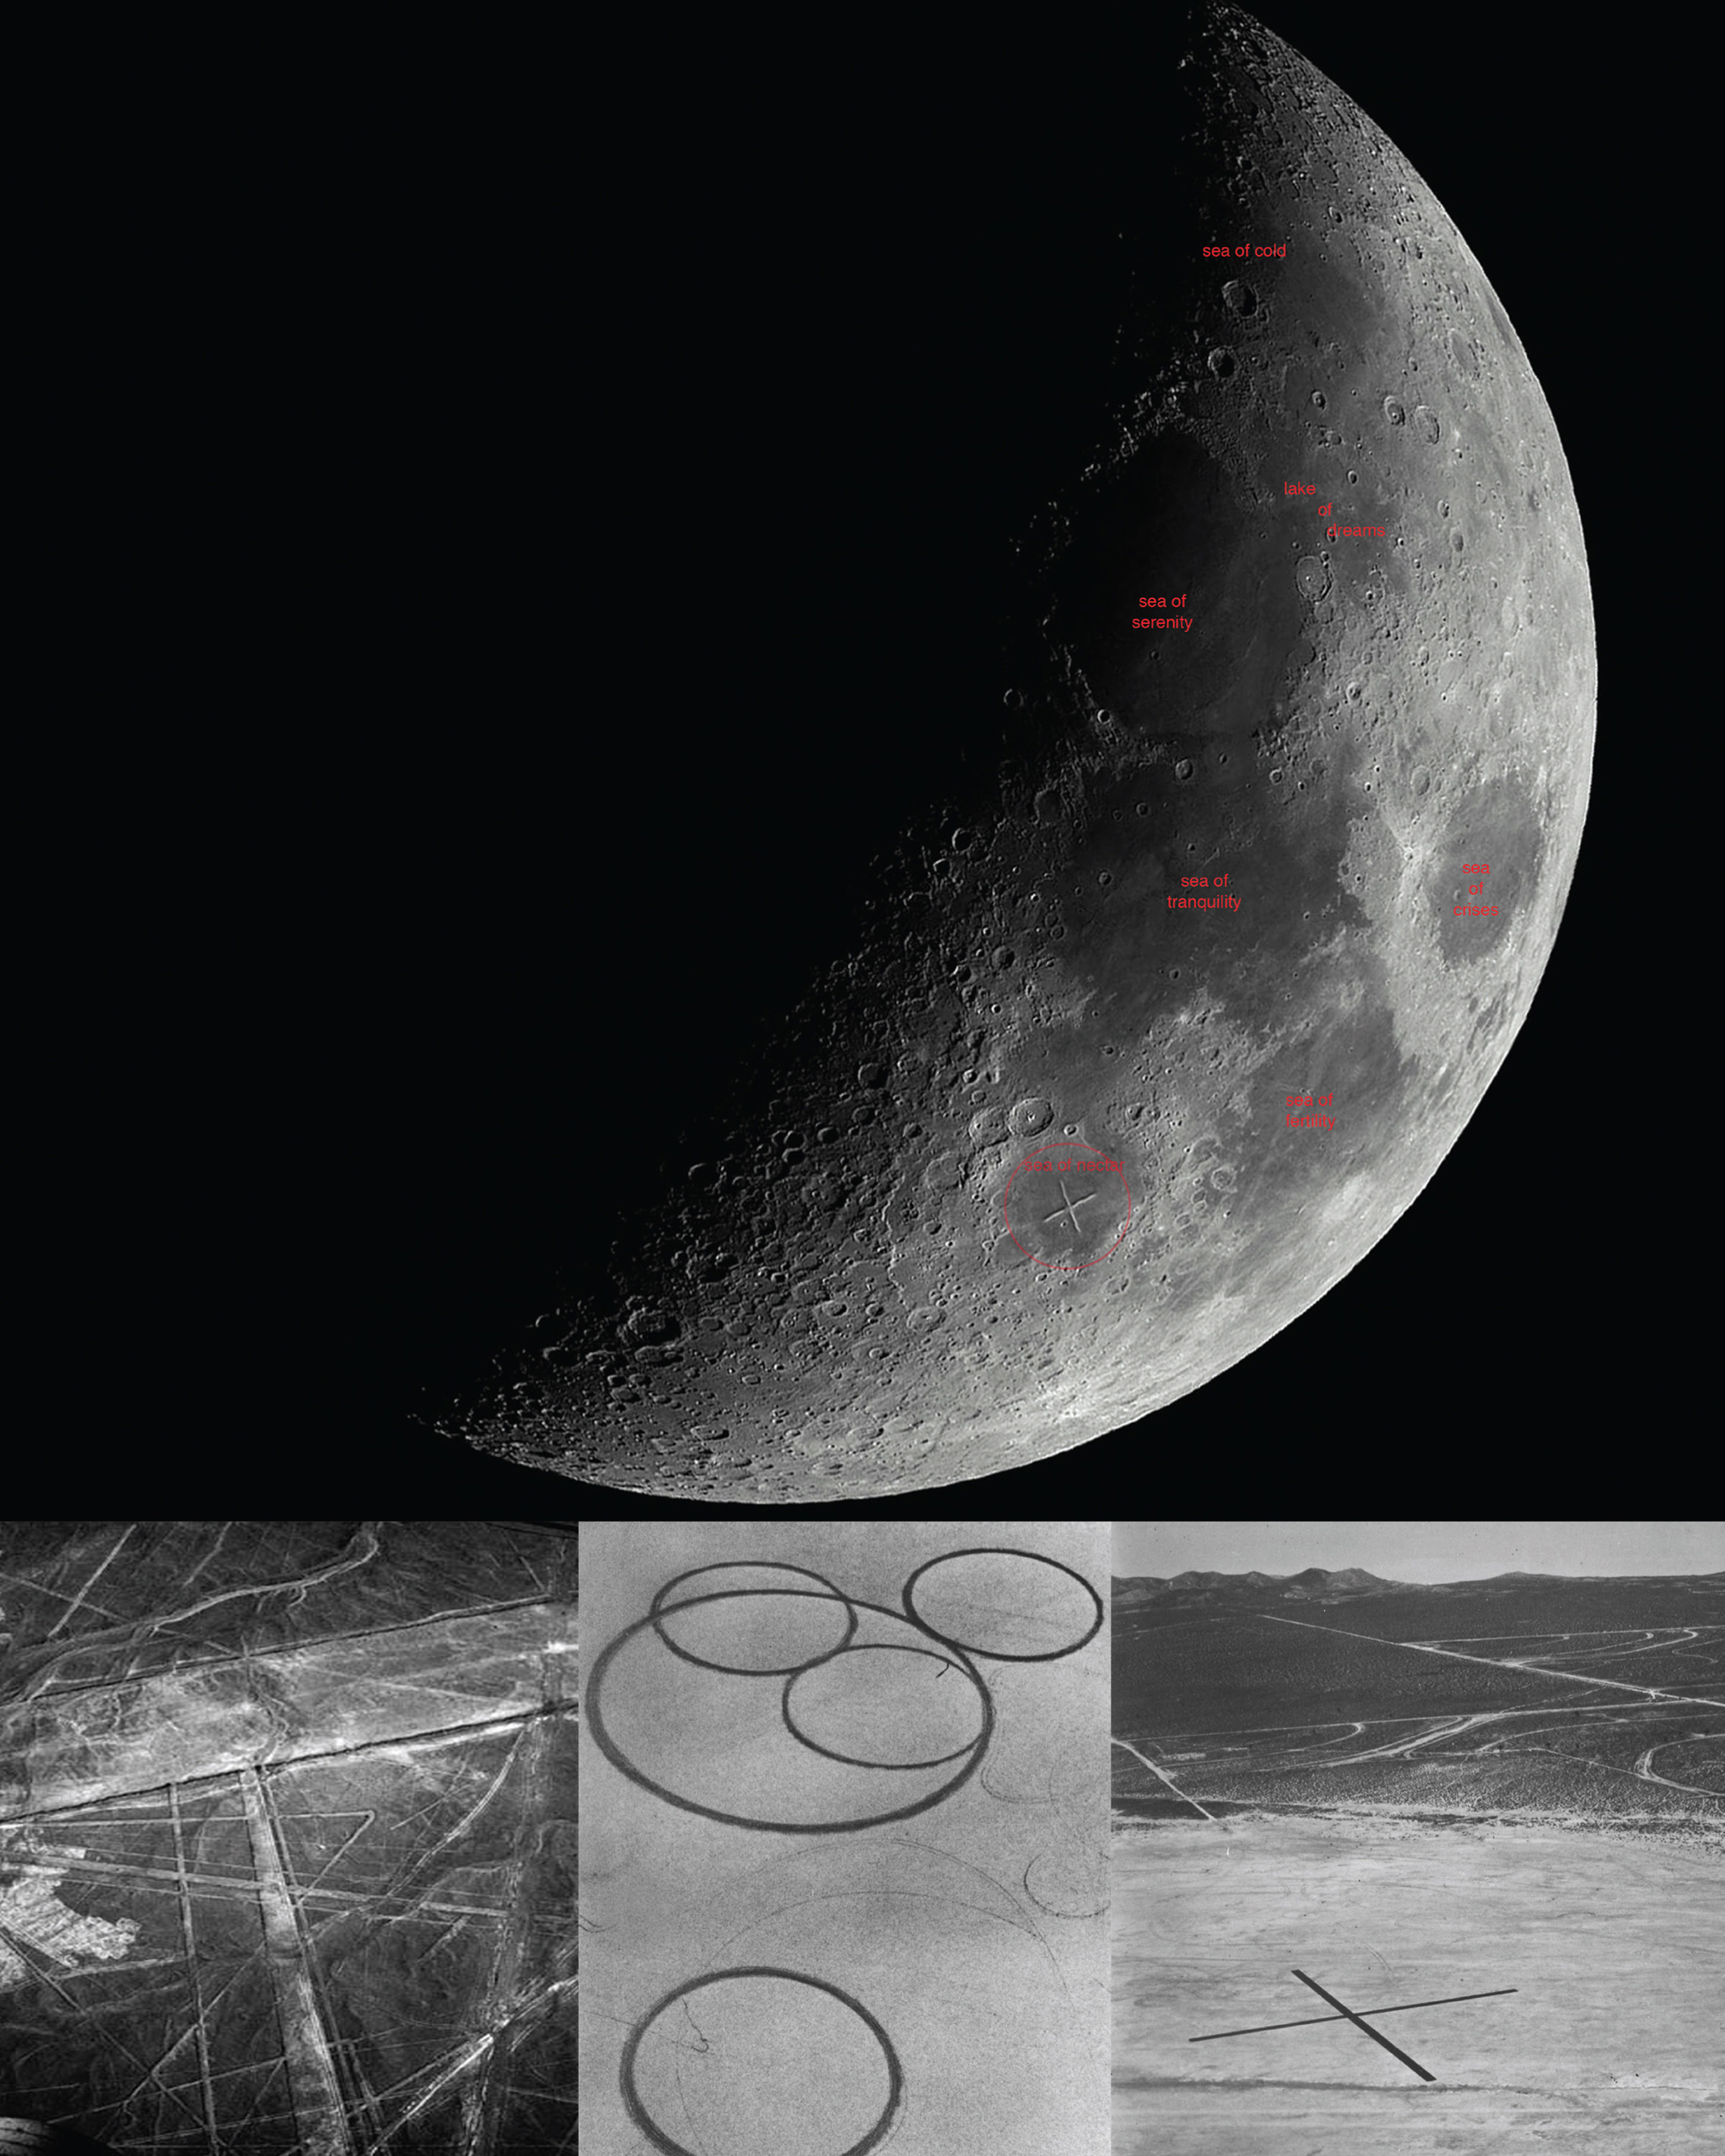 Four images showing the surface of the moon, and geometric tracks left in the dust.